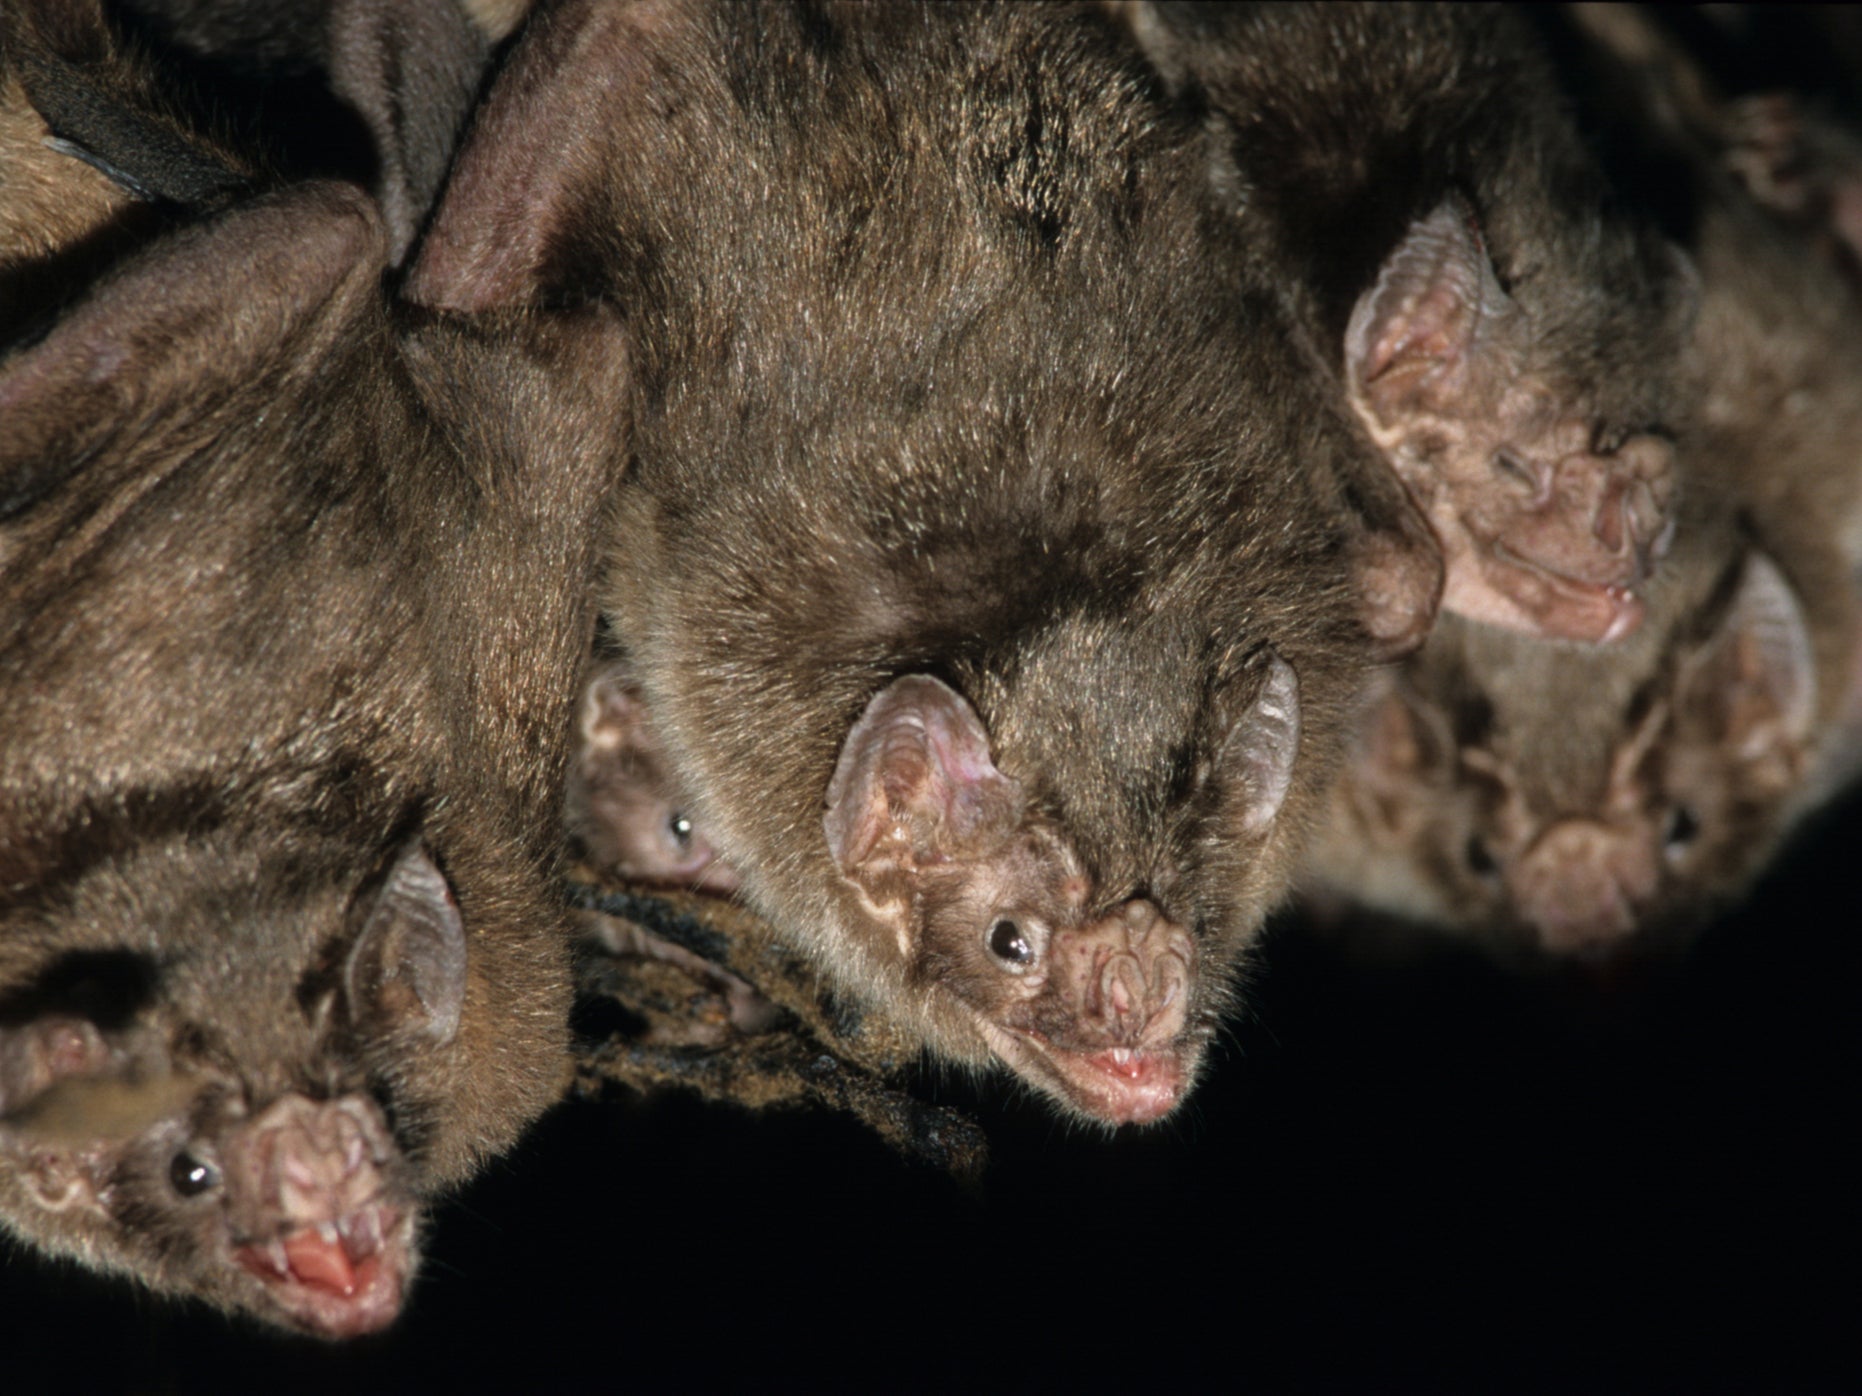 Table for two? Vampire bats meet up while foraging to share information about access to open wounds, researchers say